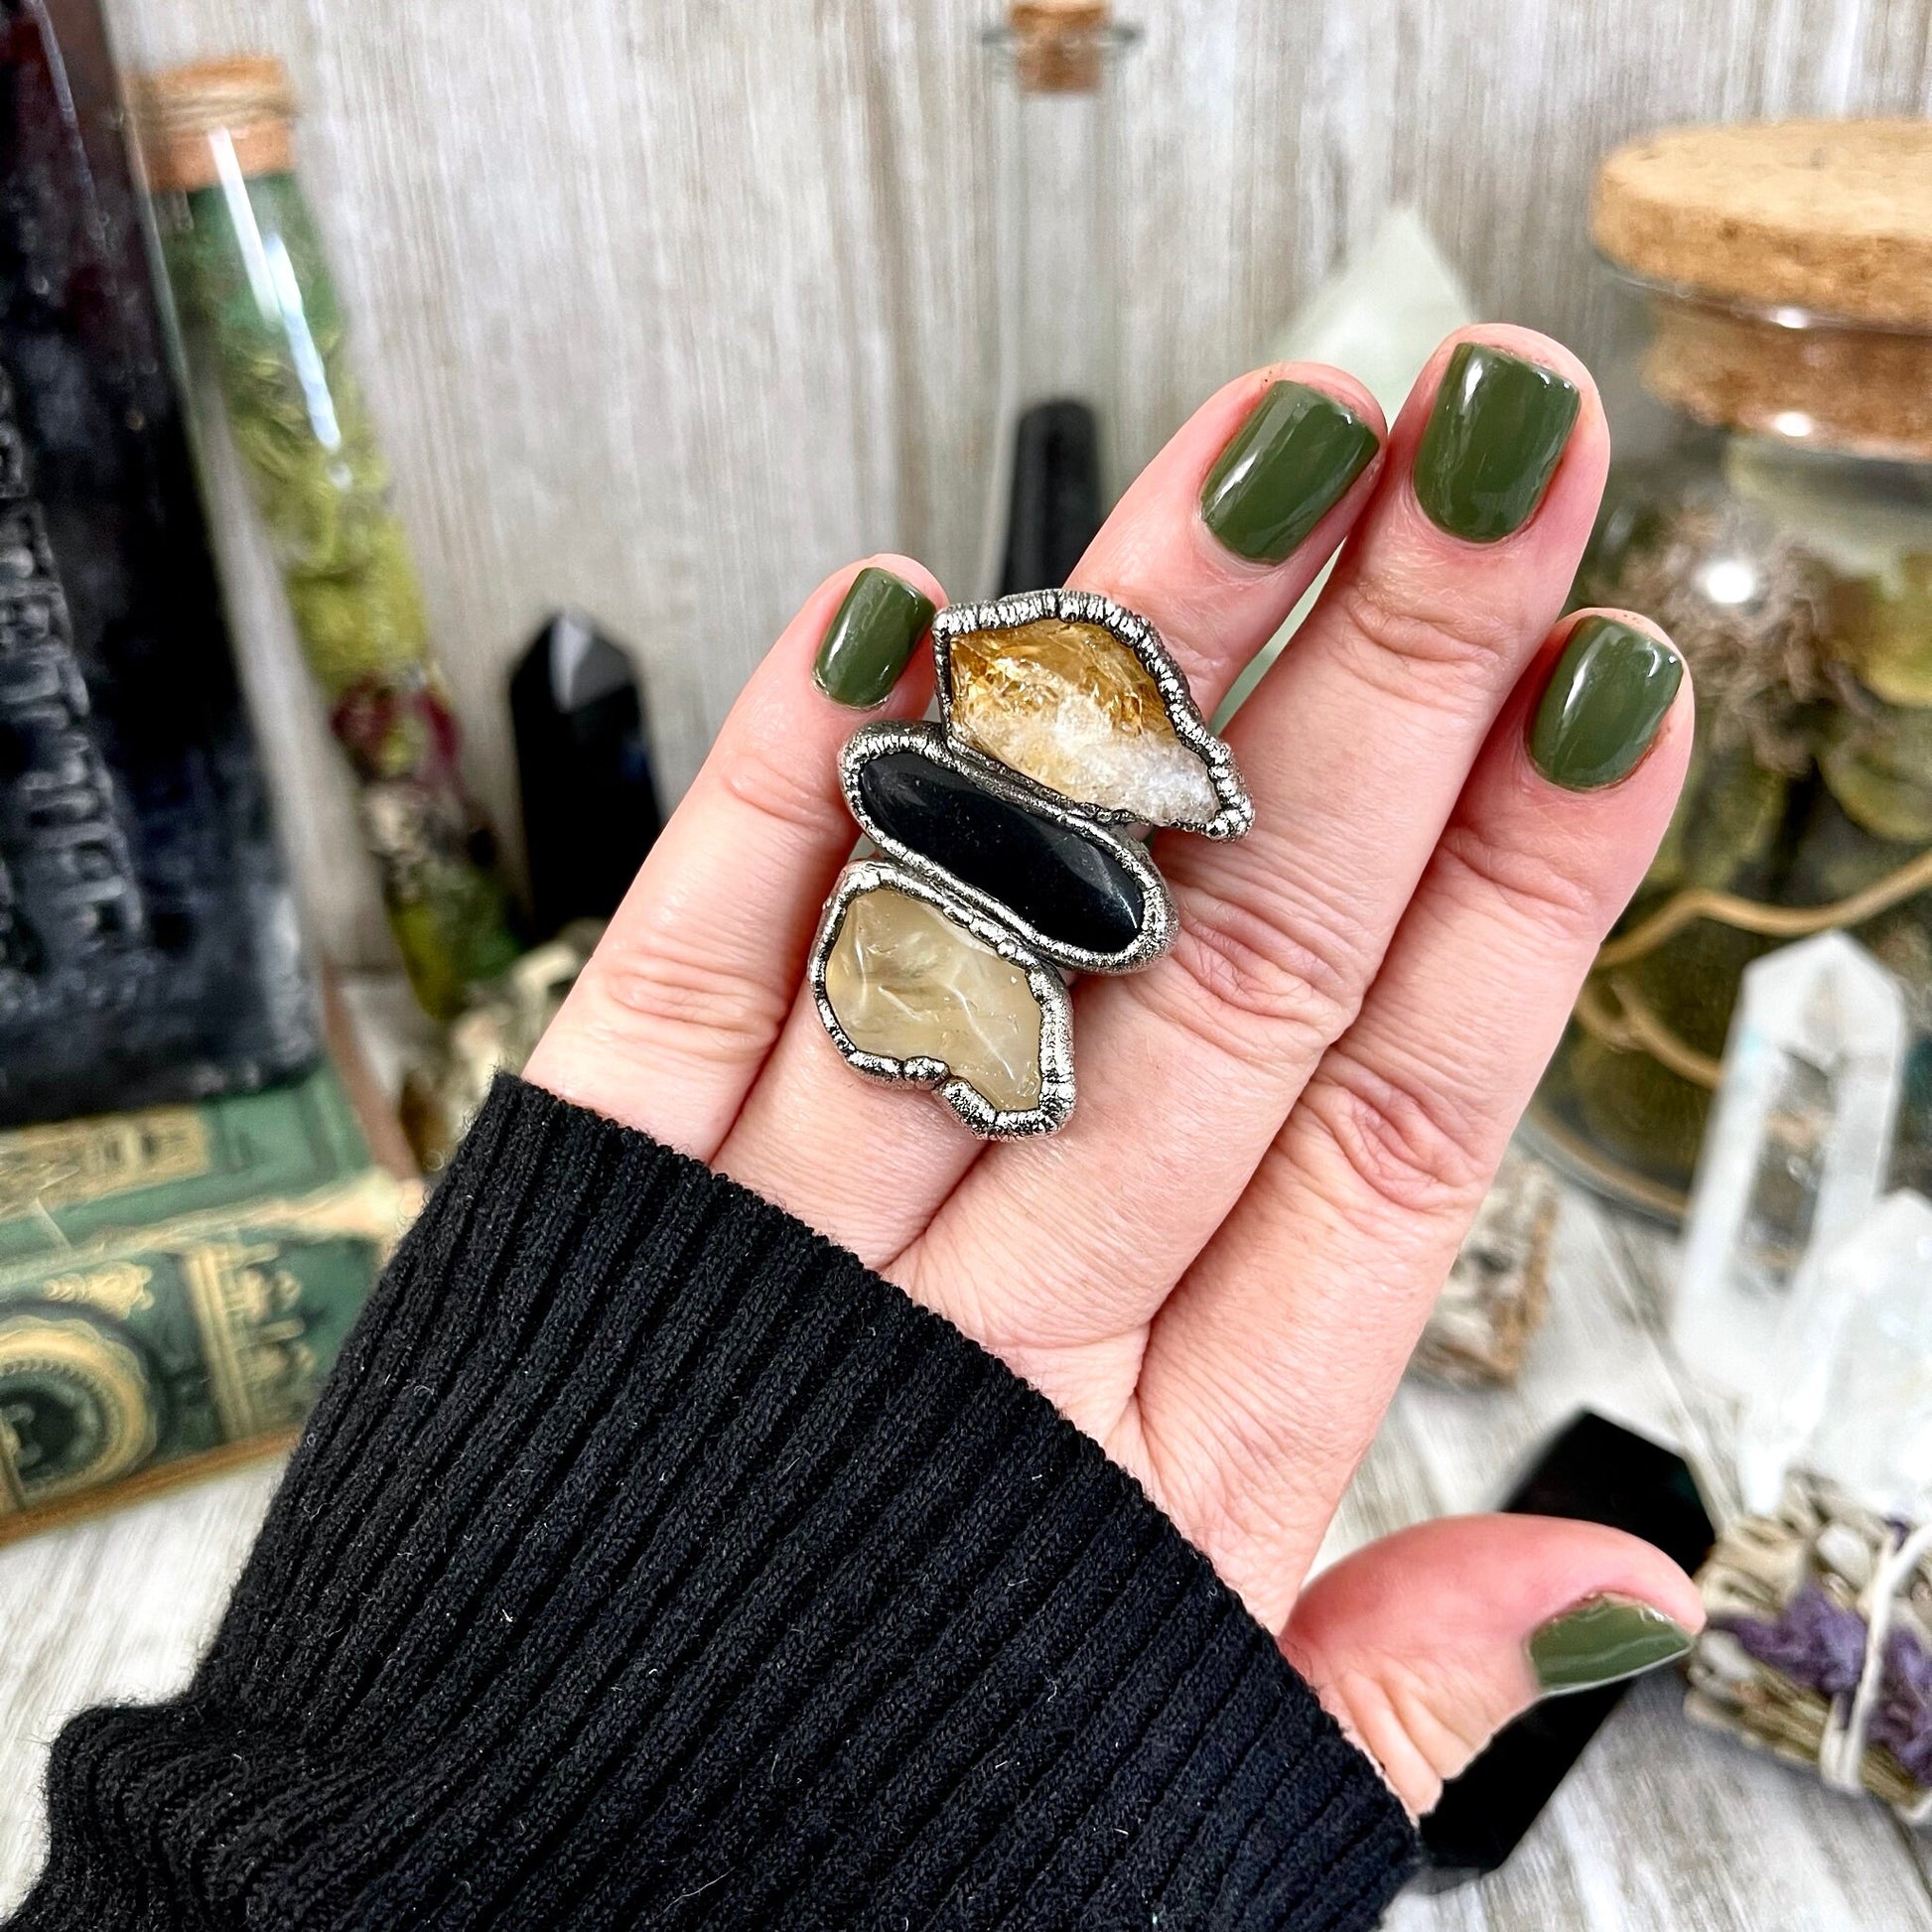 Size 6 Crystal Ring - Three Stone Black Onyx Yellow Citrine Silver Ring / Foxlark Collection - One of a Kind / Big Crystal Jewelry